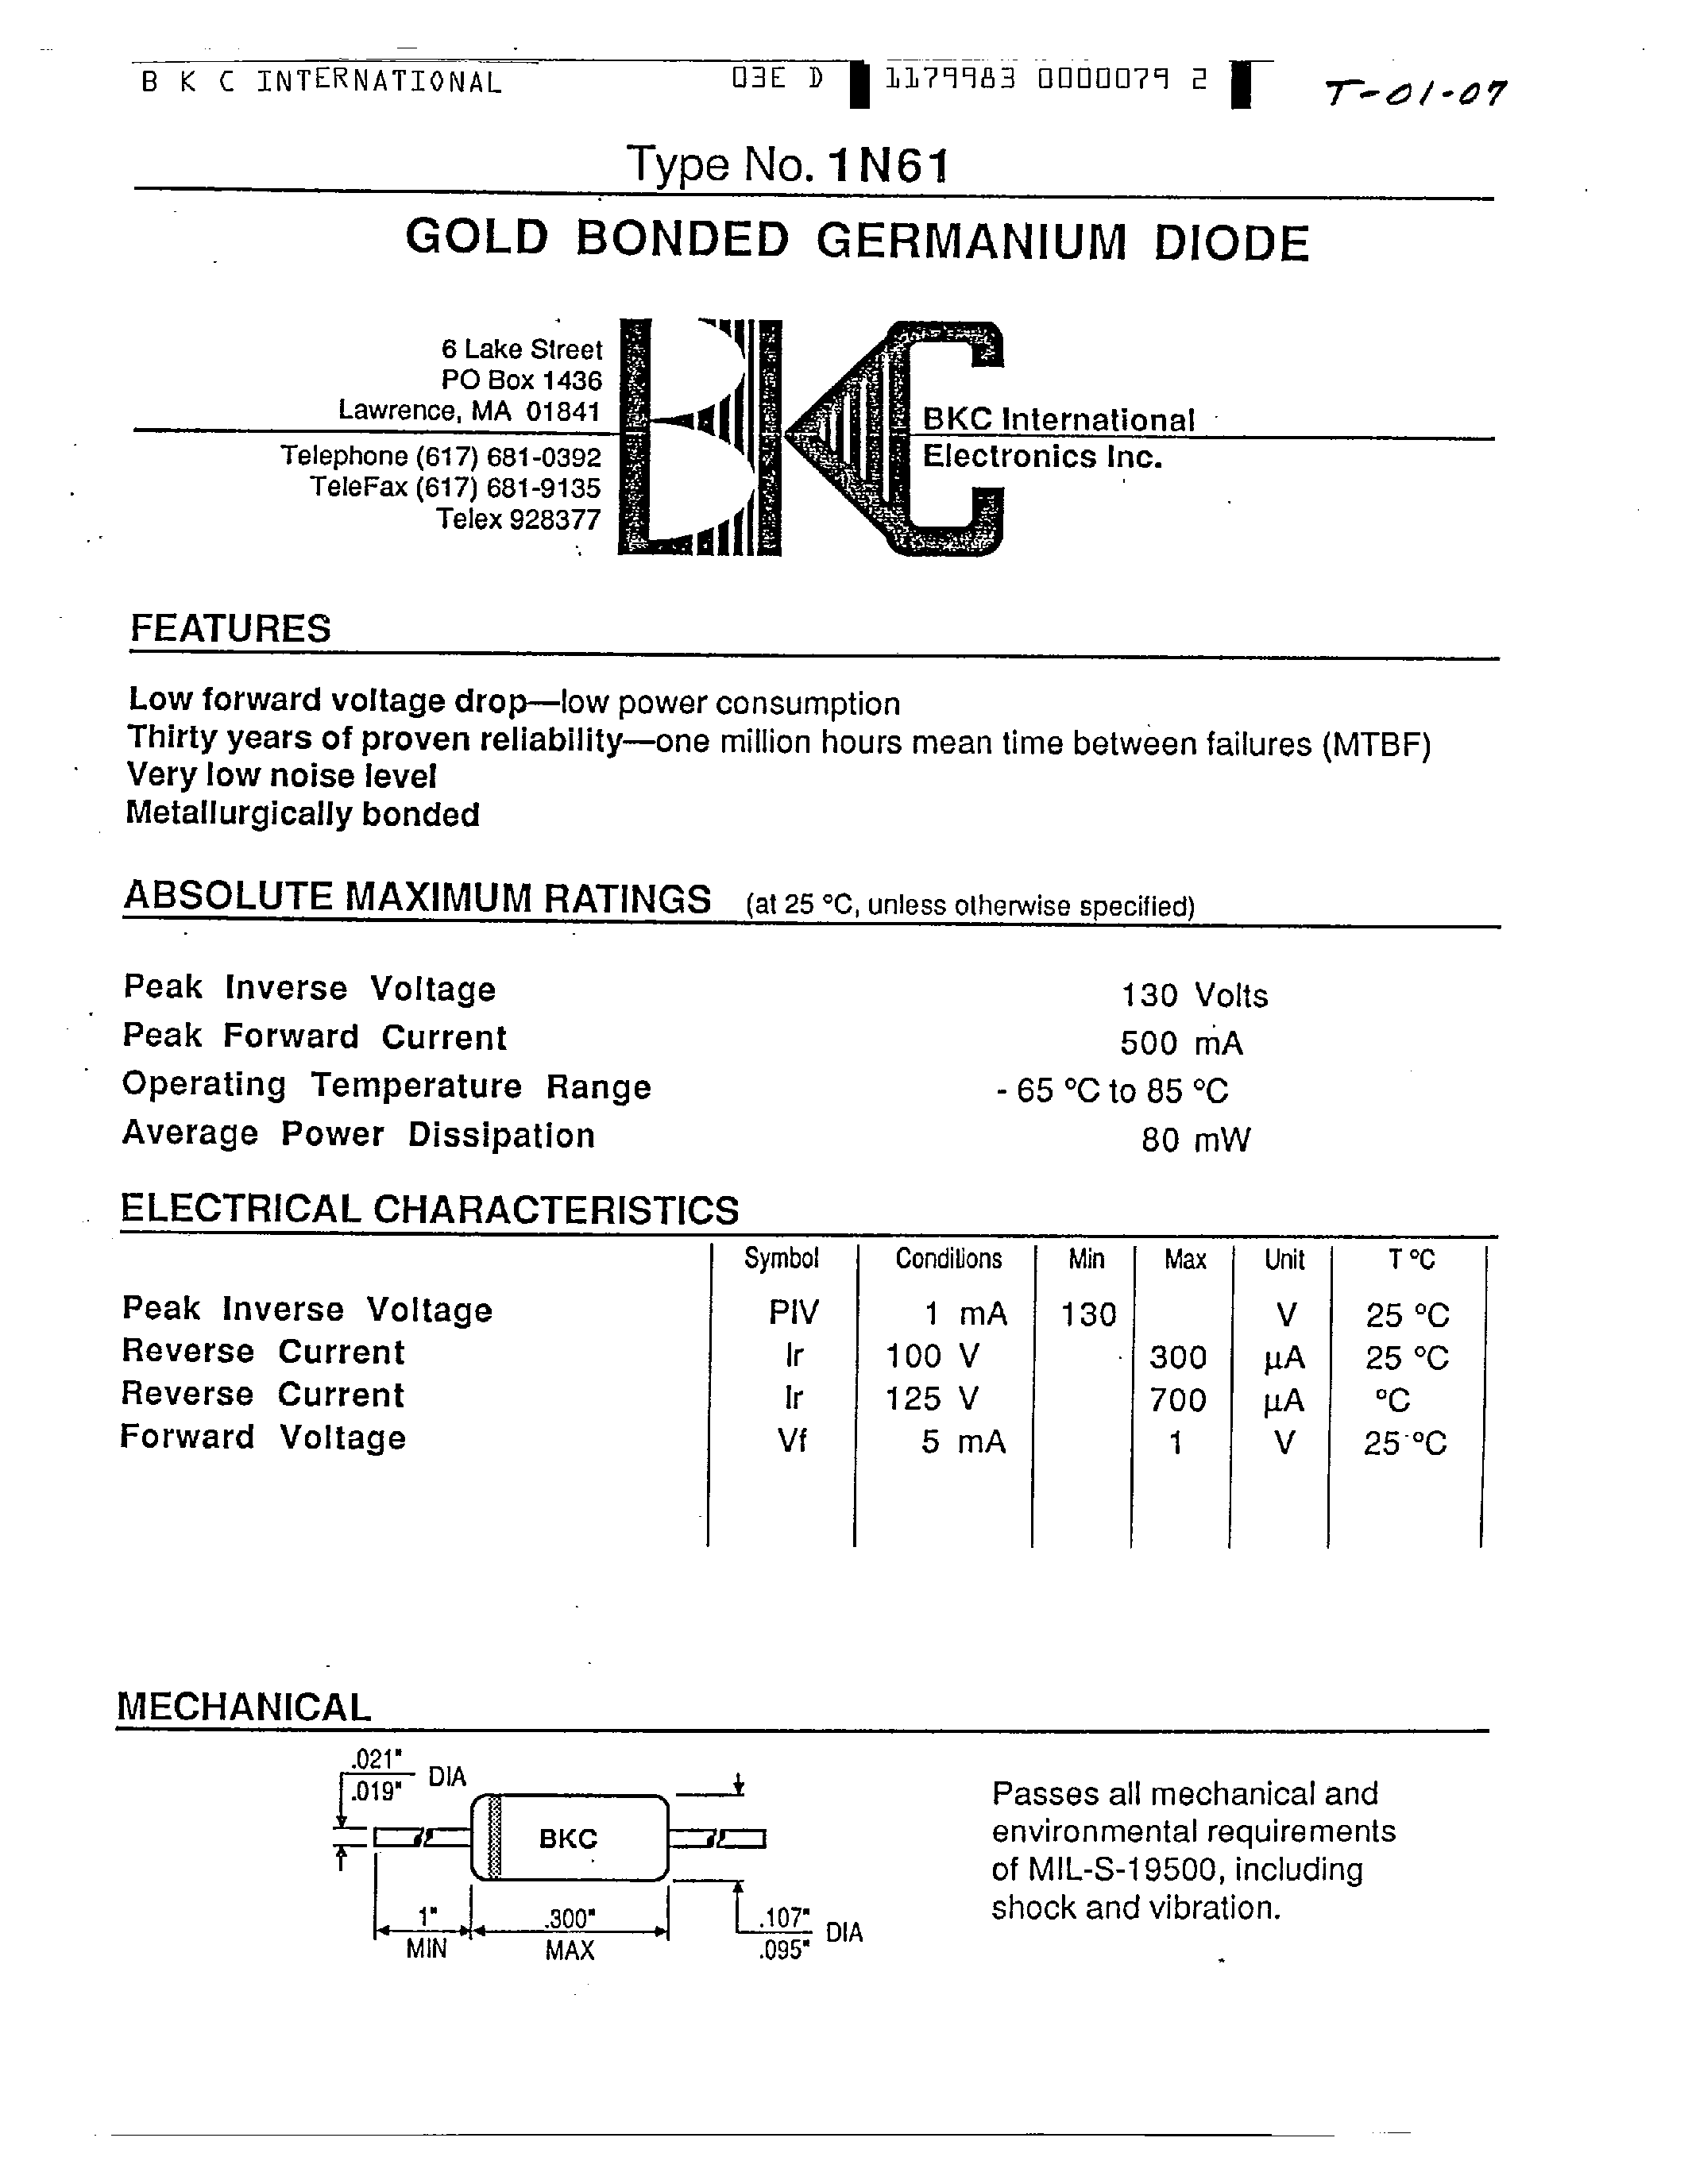 Datasheet 1N70 - (1N7x) GOLD BONDED DIODES page 2